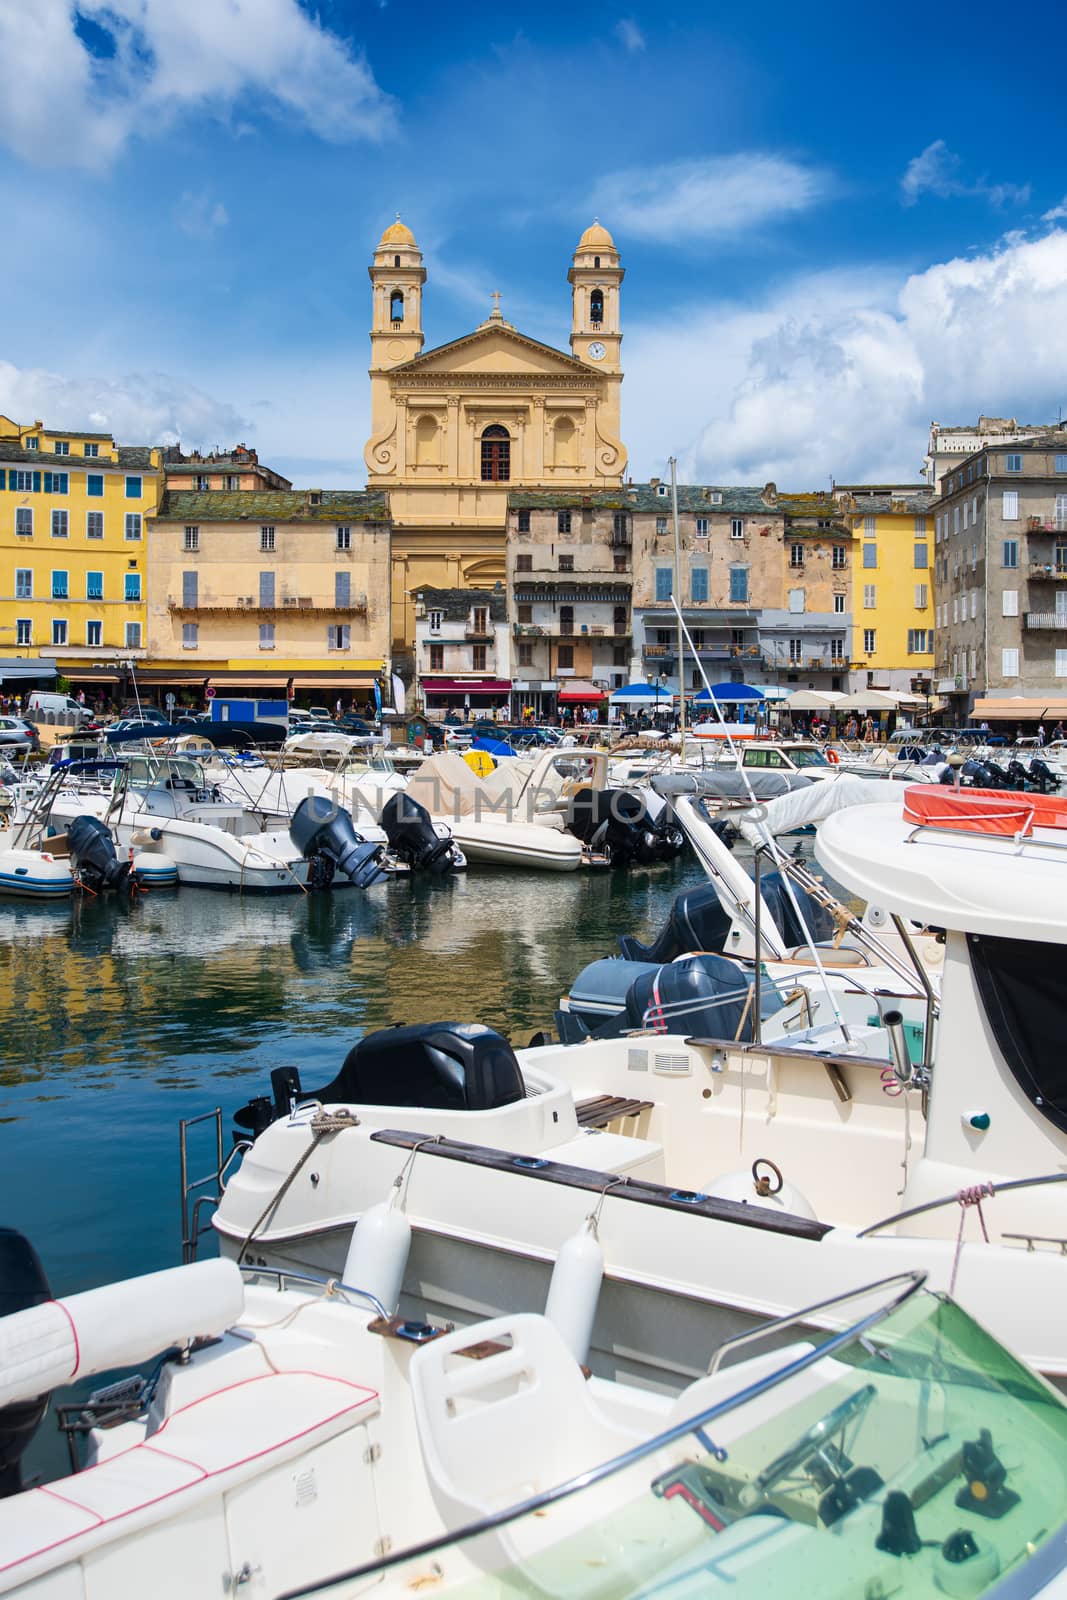 view on église Saint Jean-Baptiste in Bastia from the vieux port with some boats resting in the habour during summertime